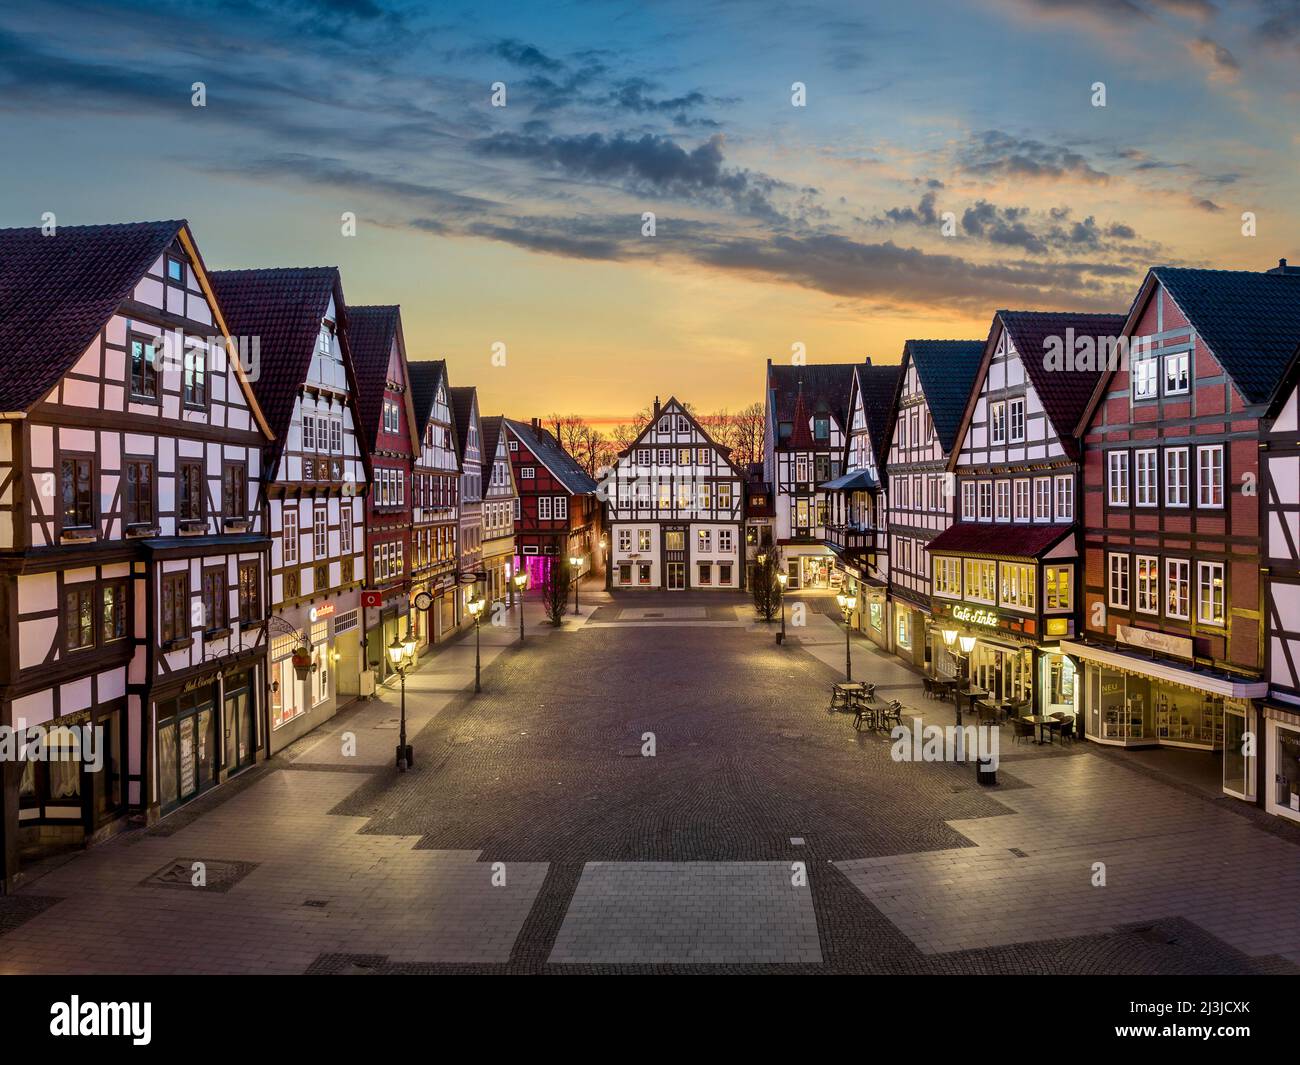 Old town of Rinteln at sunset, Germany Stock Photo